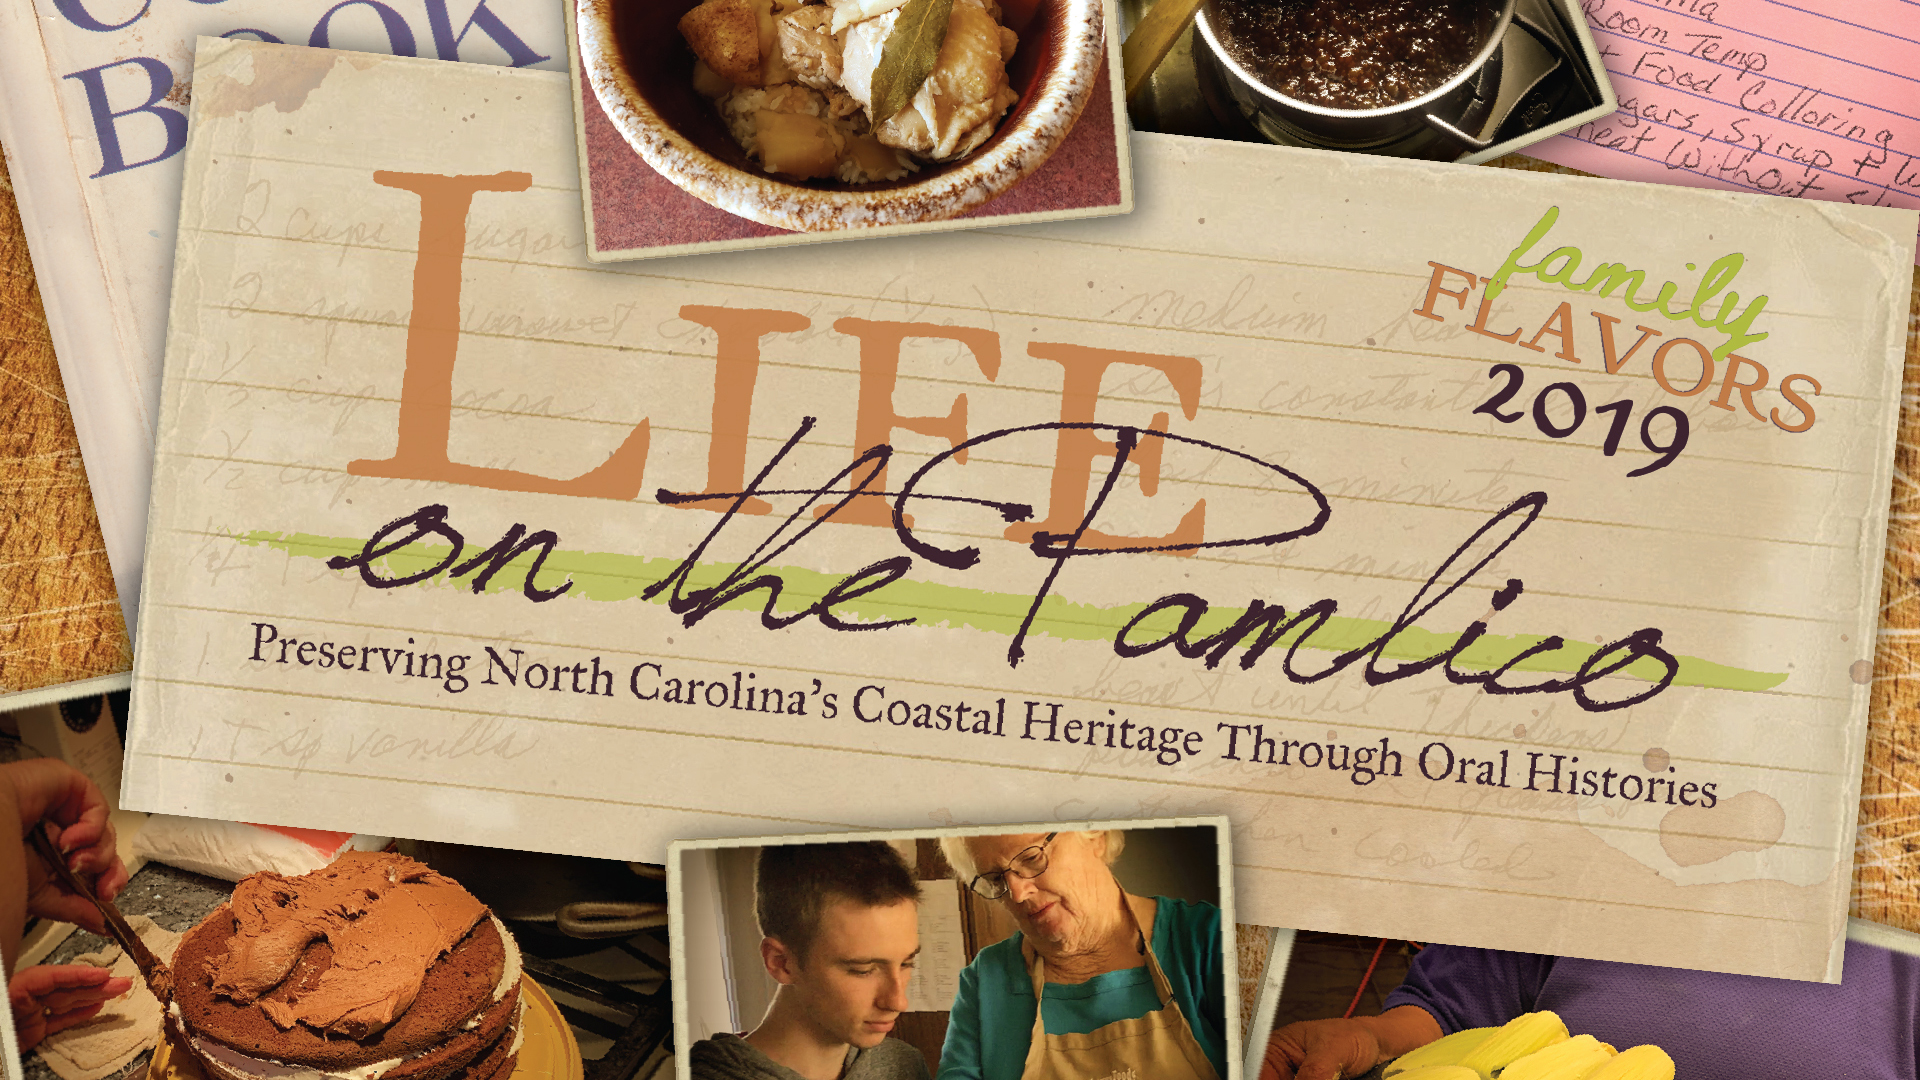 Join us in the Library at noon on September 24 for food samples from local family recipes featured in the magazine.